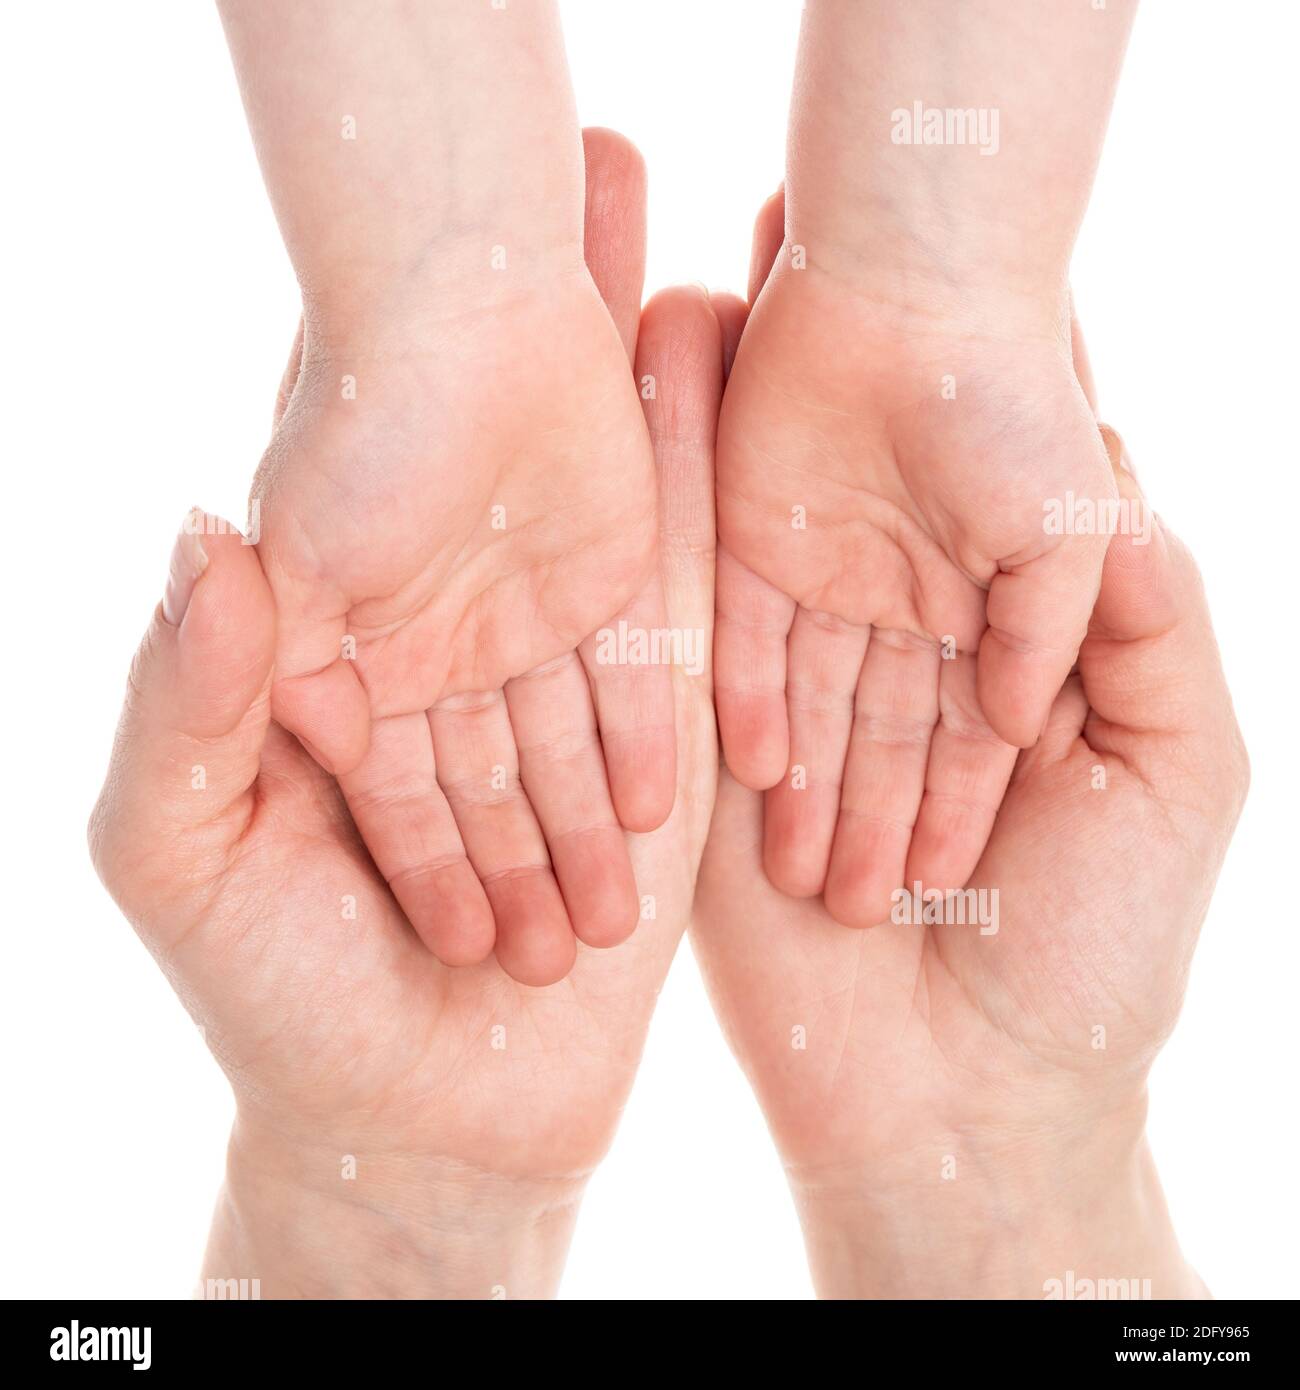 Little girl showing her hands with palms up to her mother after washing - basic protective measures against spreading of coronavirus epidemy concept Stock Photo